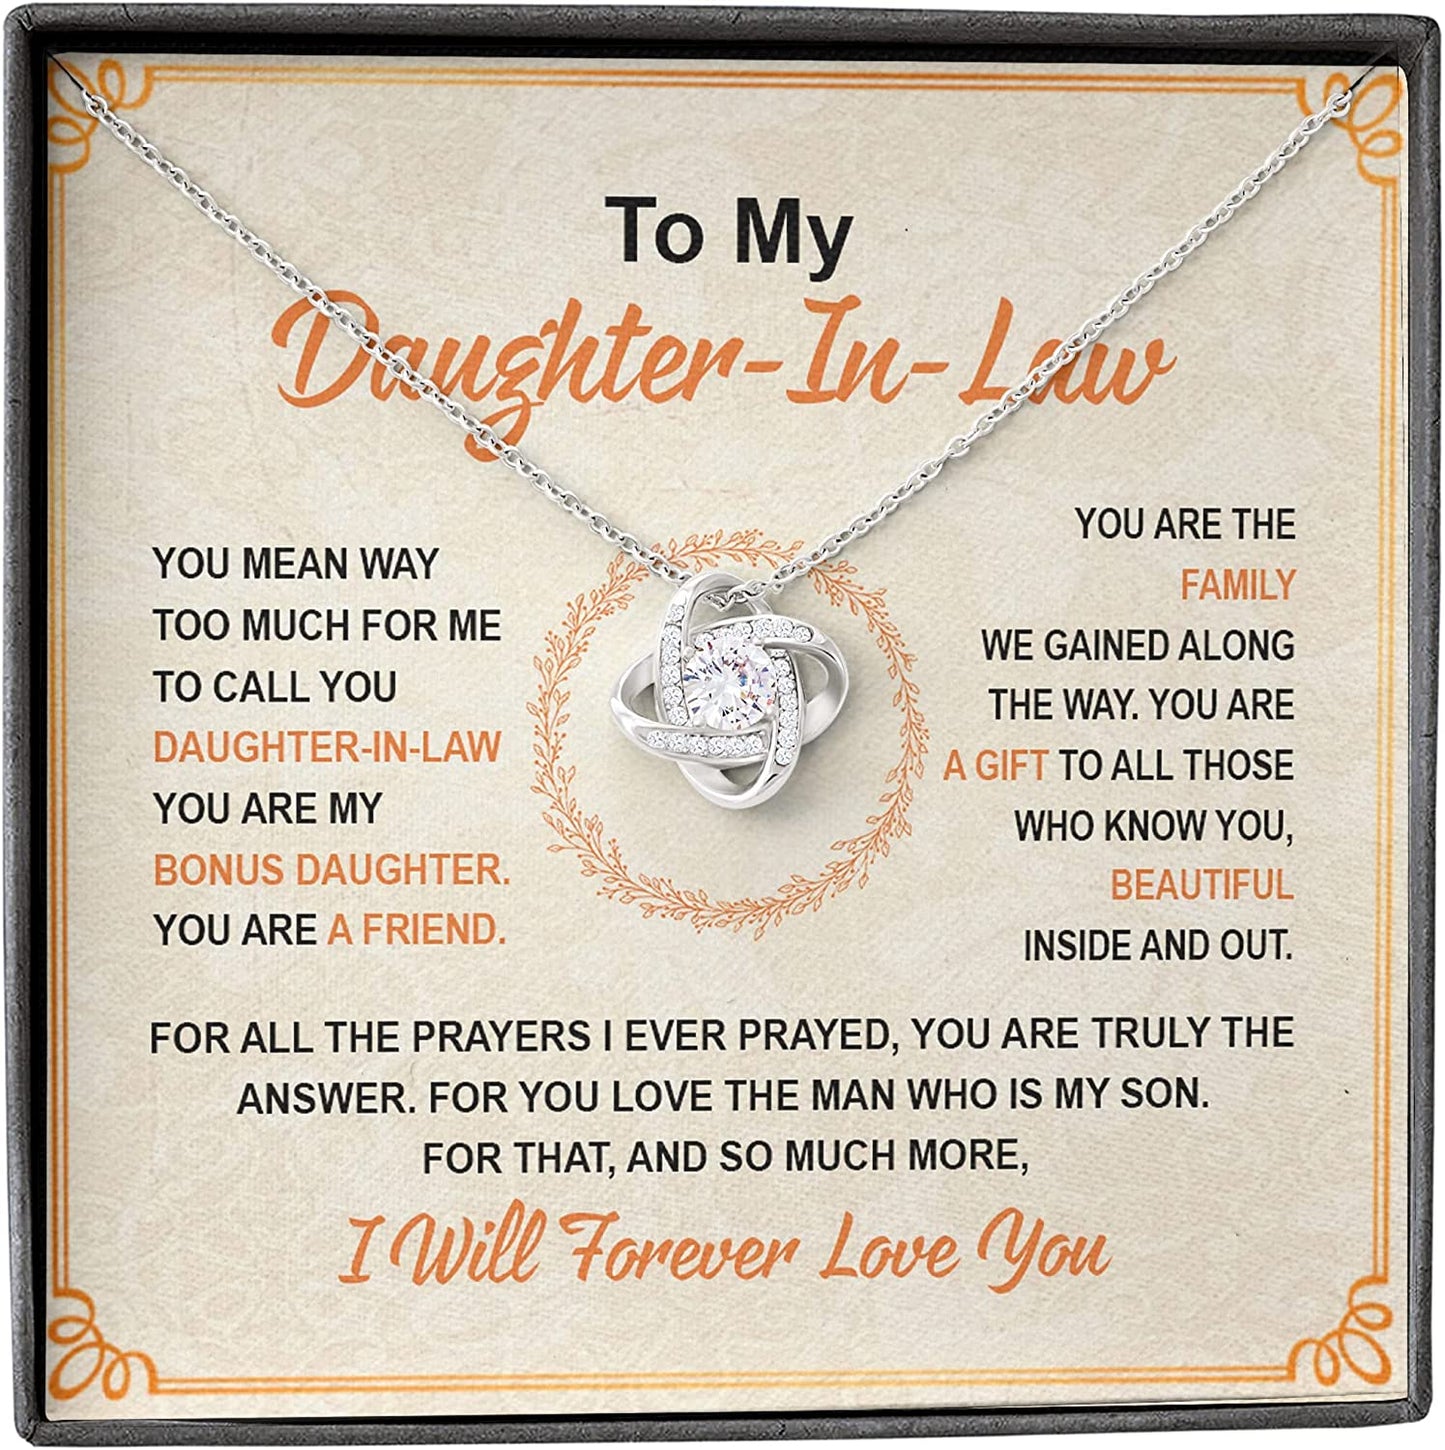 Daughter In Law Gift Ideas - To My Daughter In Law Necklace, Gifts For Daughter In Law From Mother In Law On Wedding Day, Birthday, Mothers Day, Christmas, Jewelry Gifts For Future Daughter In Law